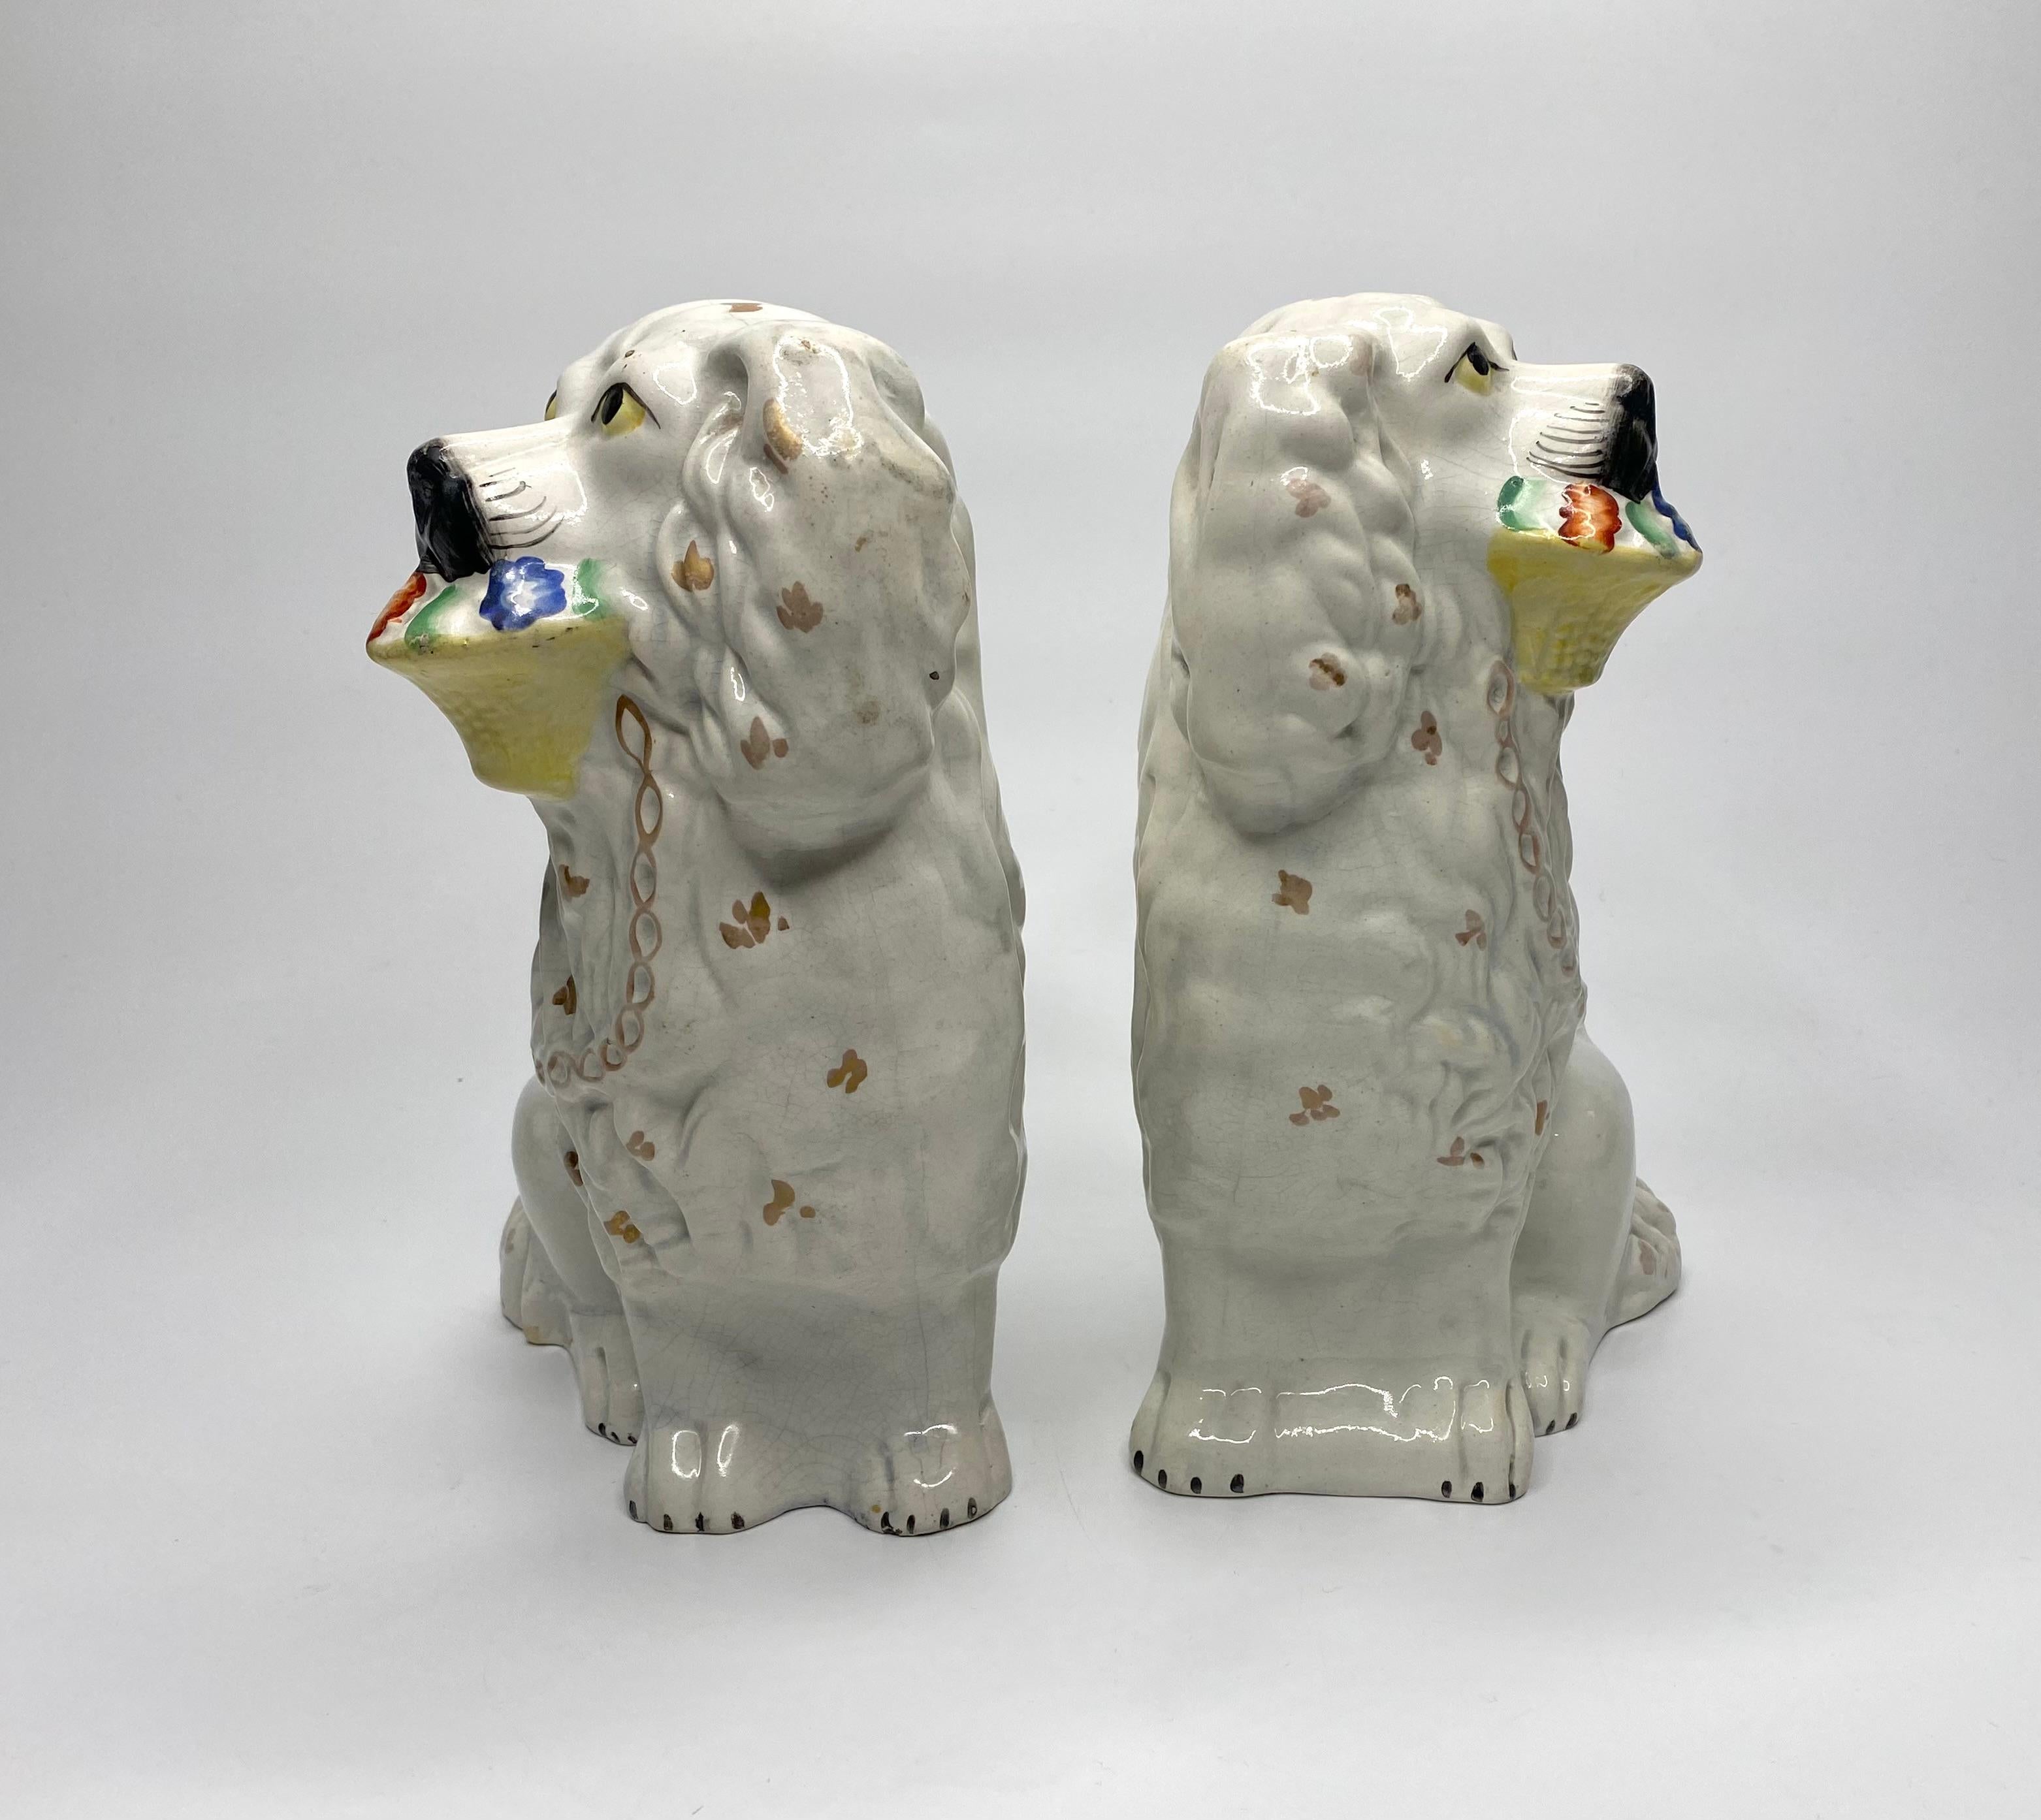 A rare pair of Staffordshire pottery Basket of Flowers Little Lion Dogs, c. 1860. Both dogs seated and moulded with gilt spotted manes. They both have moulded gilt chains, and carry a brightly enamelled basket of flowers in their mouths.
Height – 24